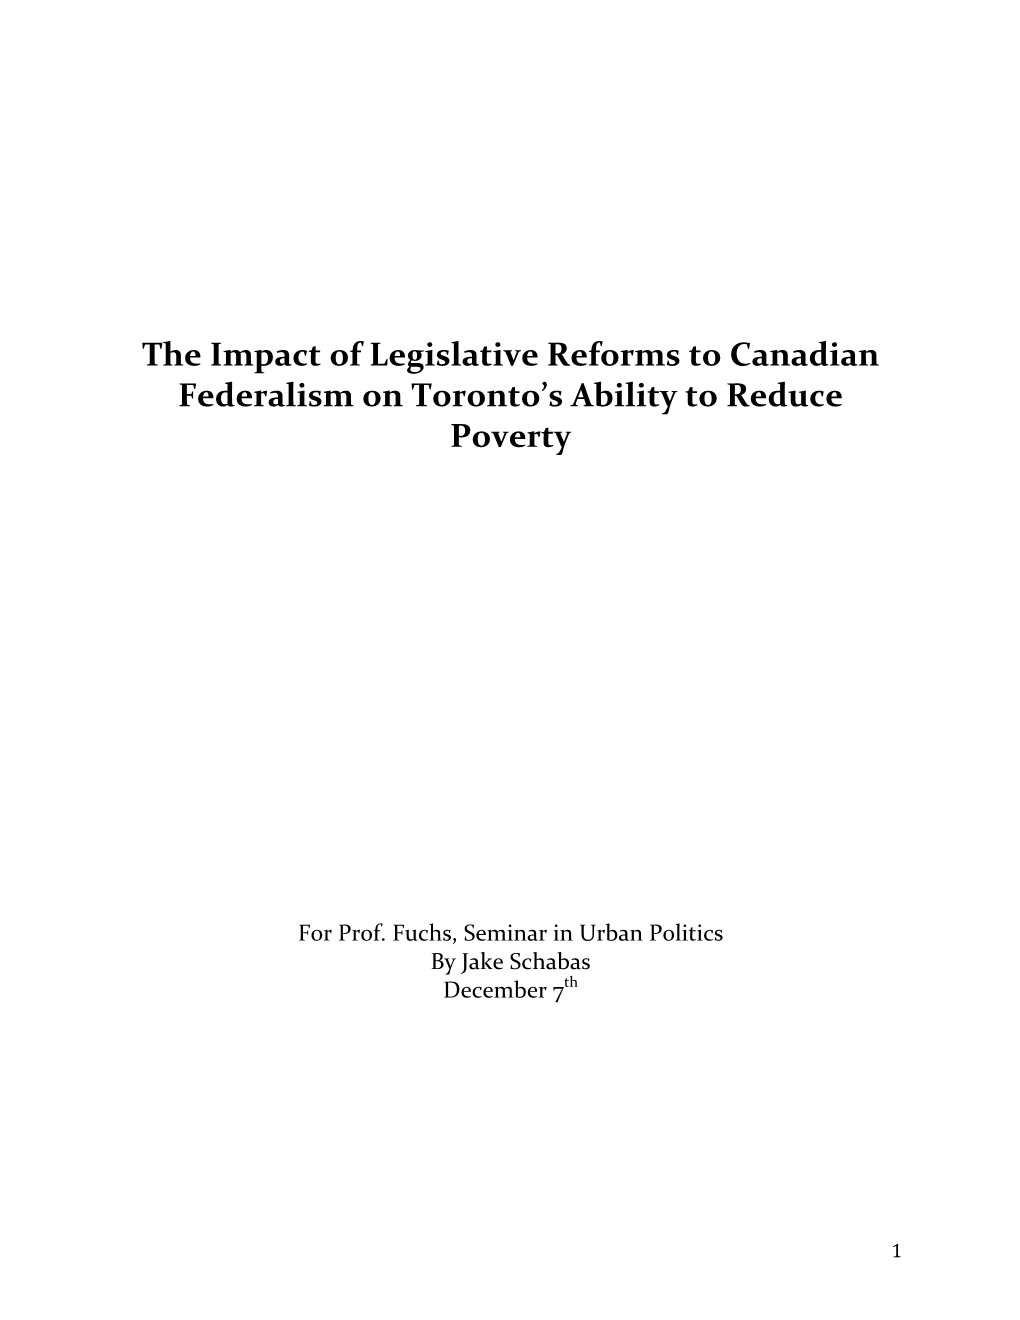 The Impact of Legislative Reforms to Canadian Federalism on Toronto's